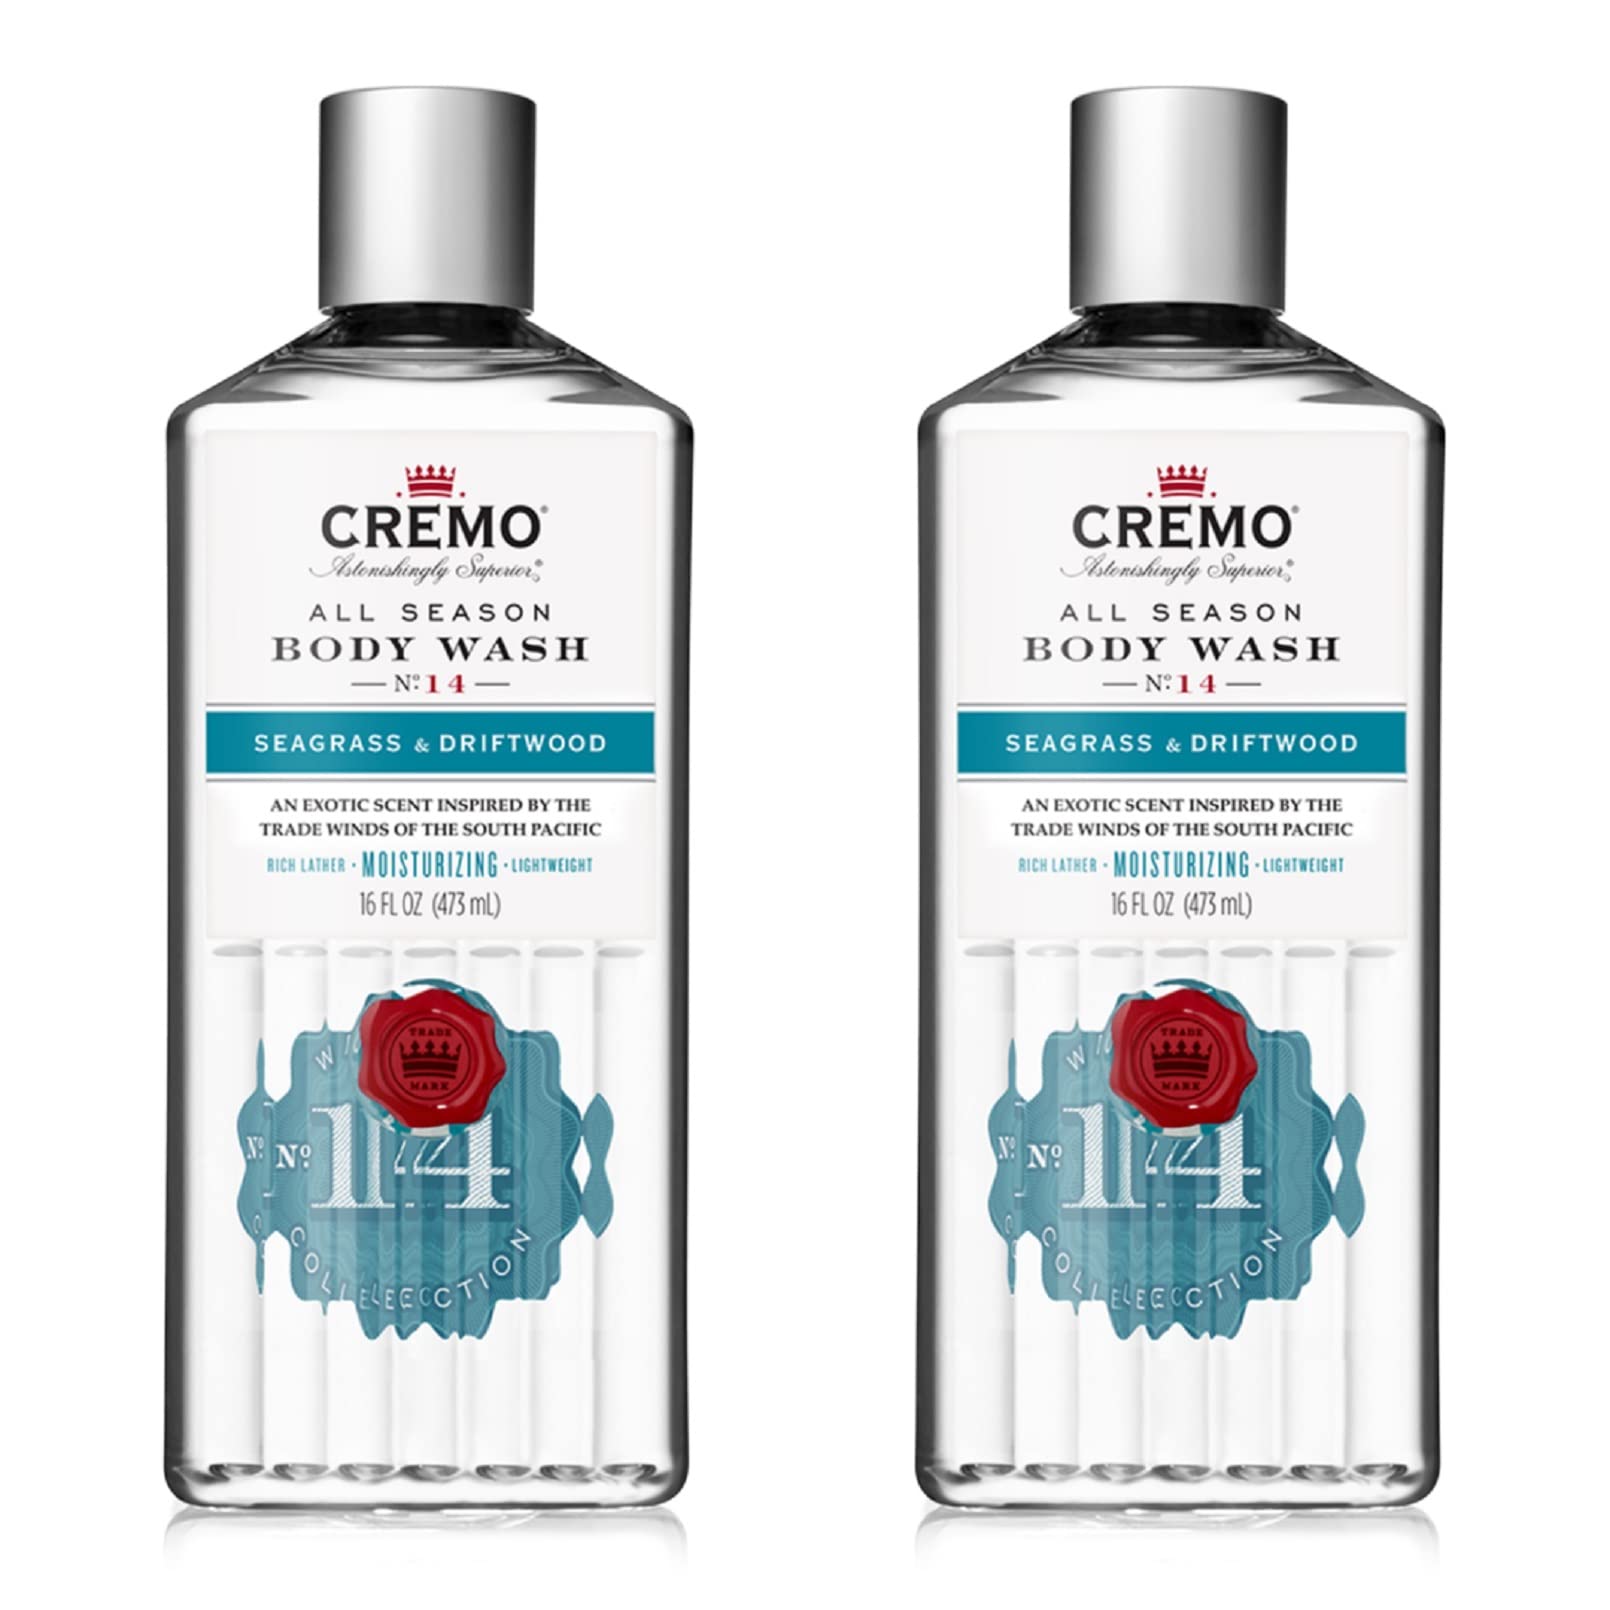 Cremo Rich-Lathering Seagrass & Driftwood Body Wash, A Coastal Scent with Notes of Sea Salt, Seagrass & Driftwood, 16 Fl Oz (2-Pack)